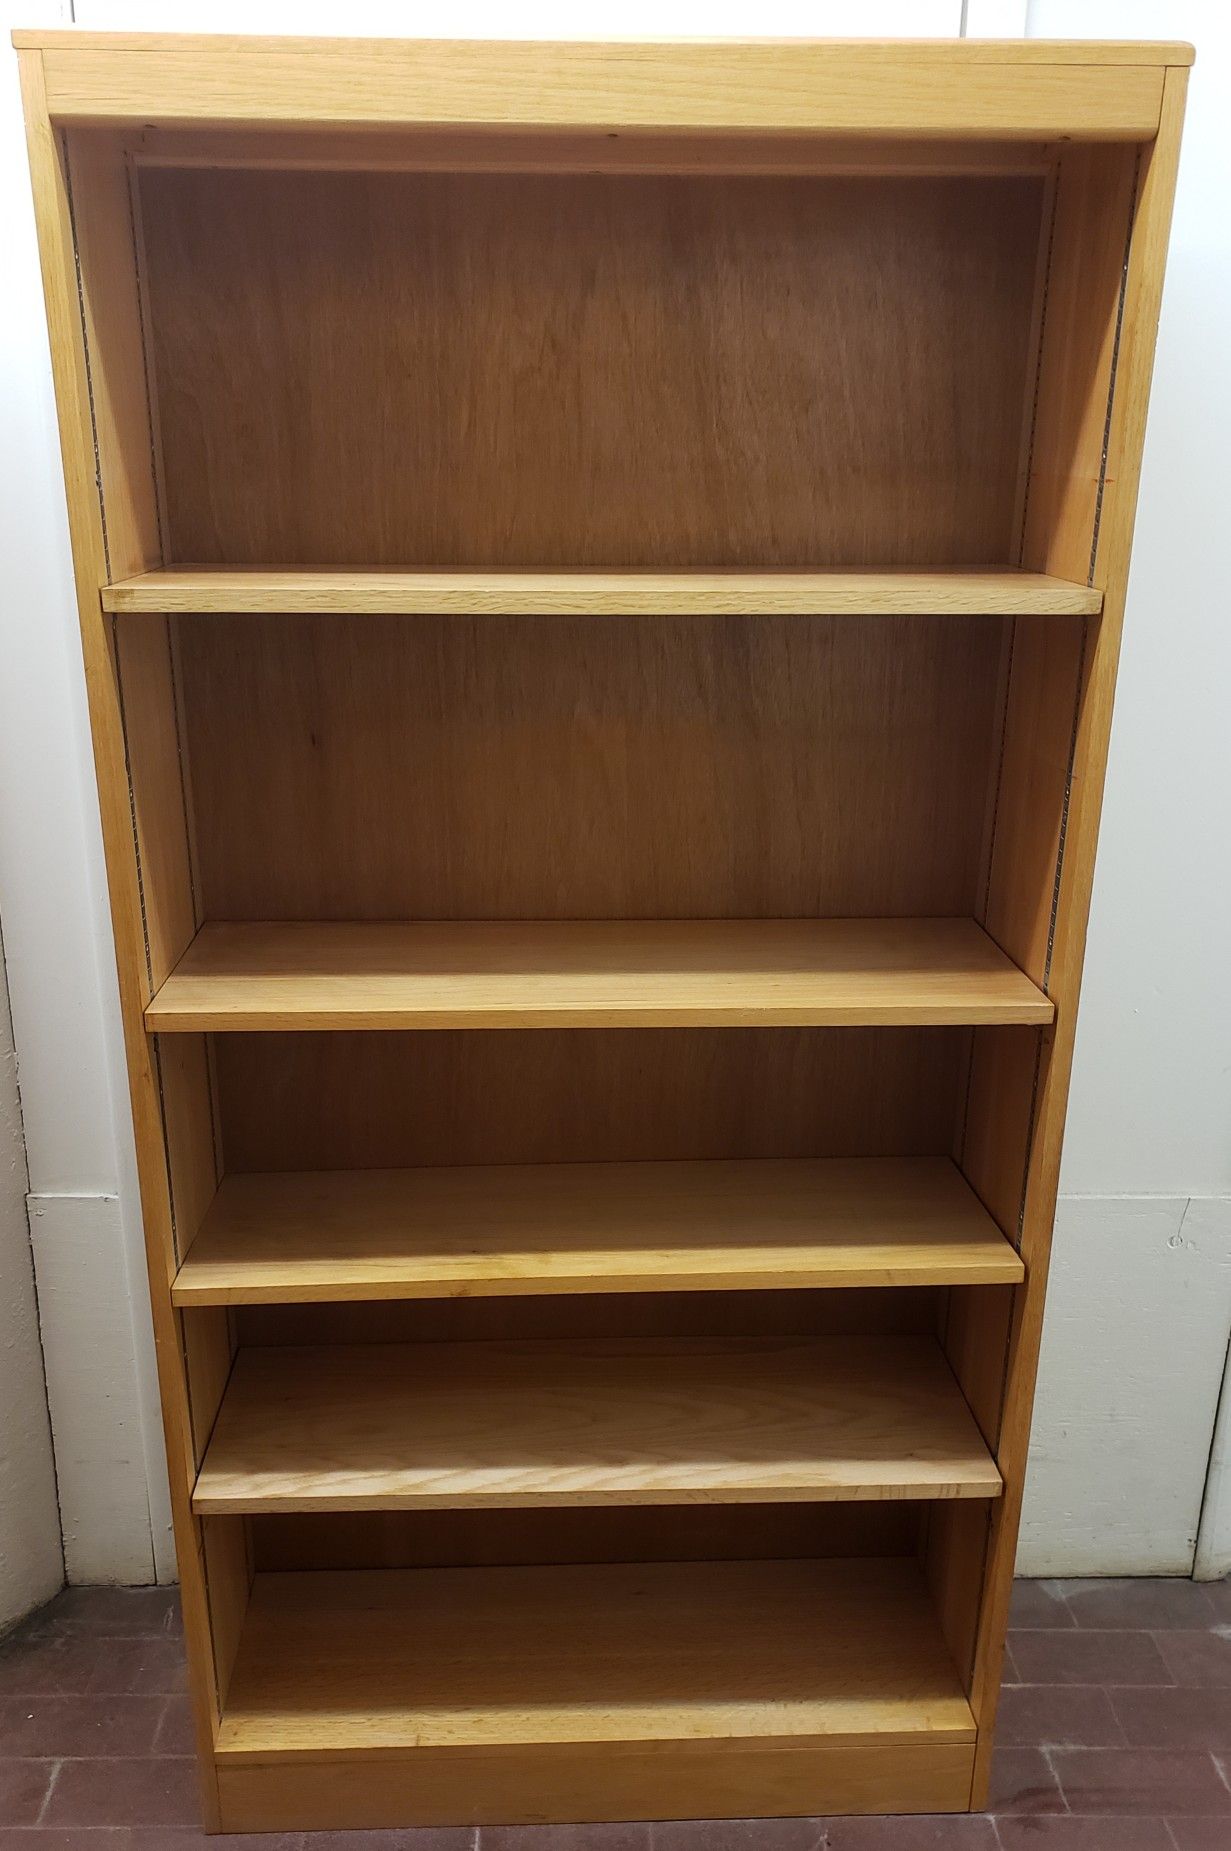 Nice Solid 5-Shelf Adjustable Bookcase (+Free Local Delivery)